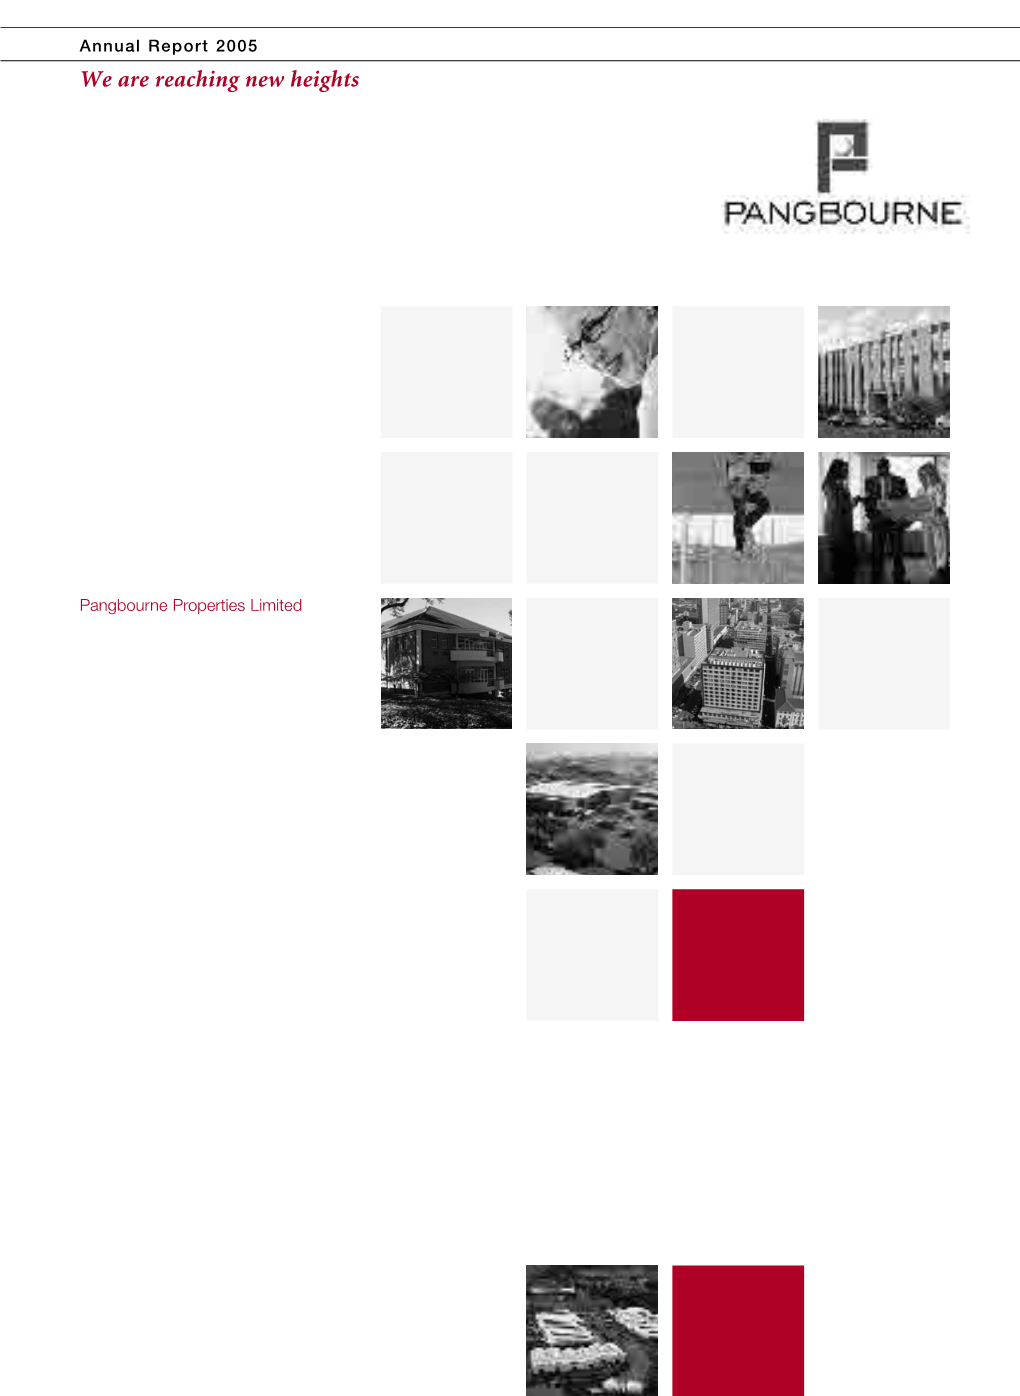 We Are Reaching New Heights Pangbourne Properties Limited Annual Report Report Annual Limited Properties Pangbourne